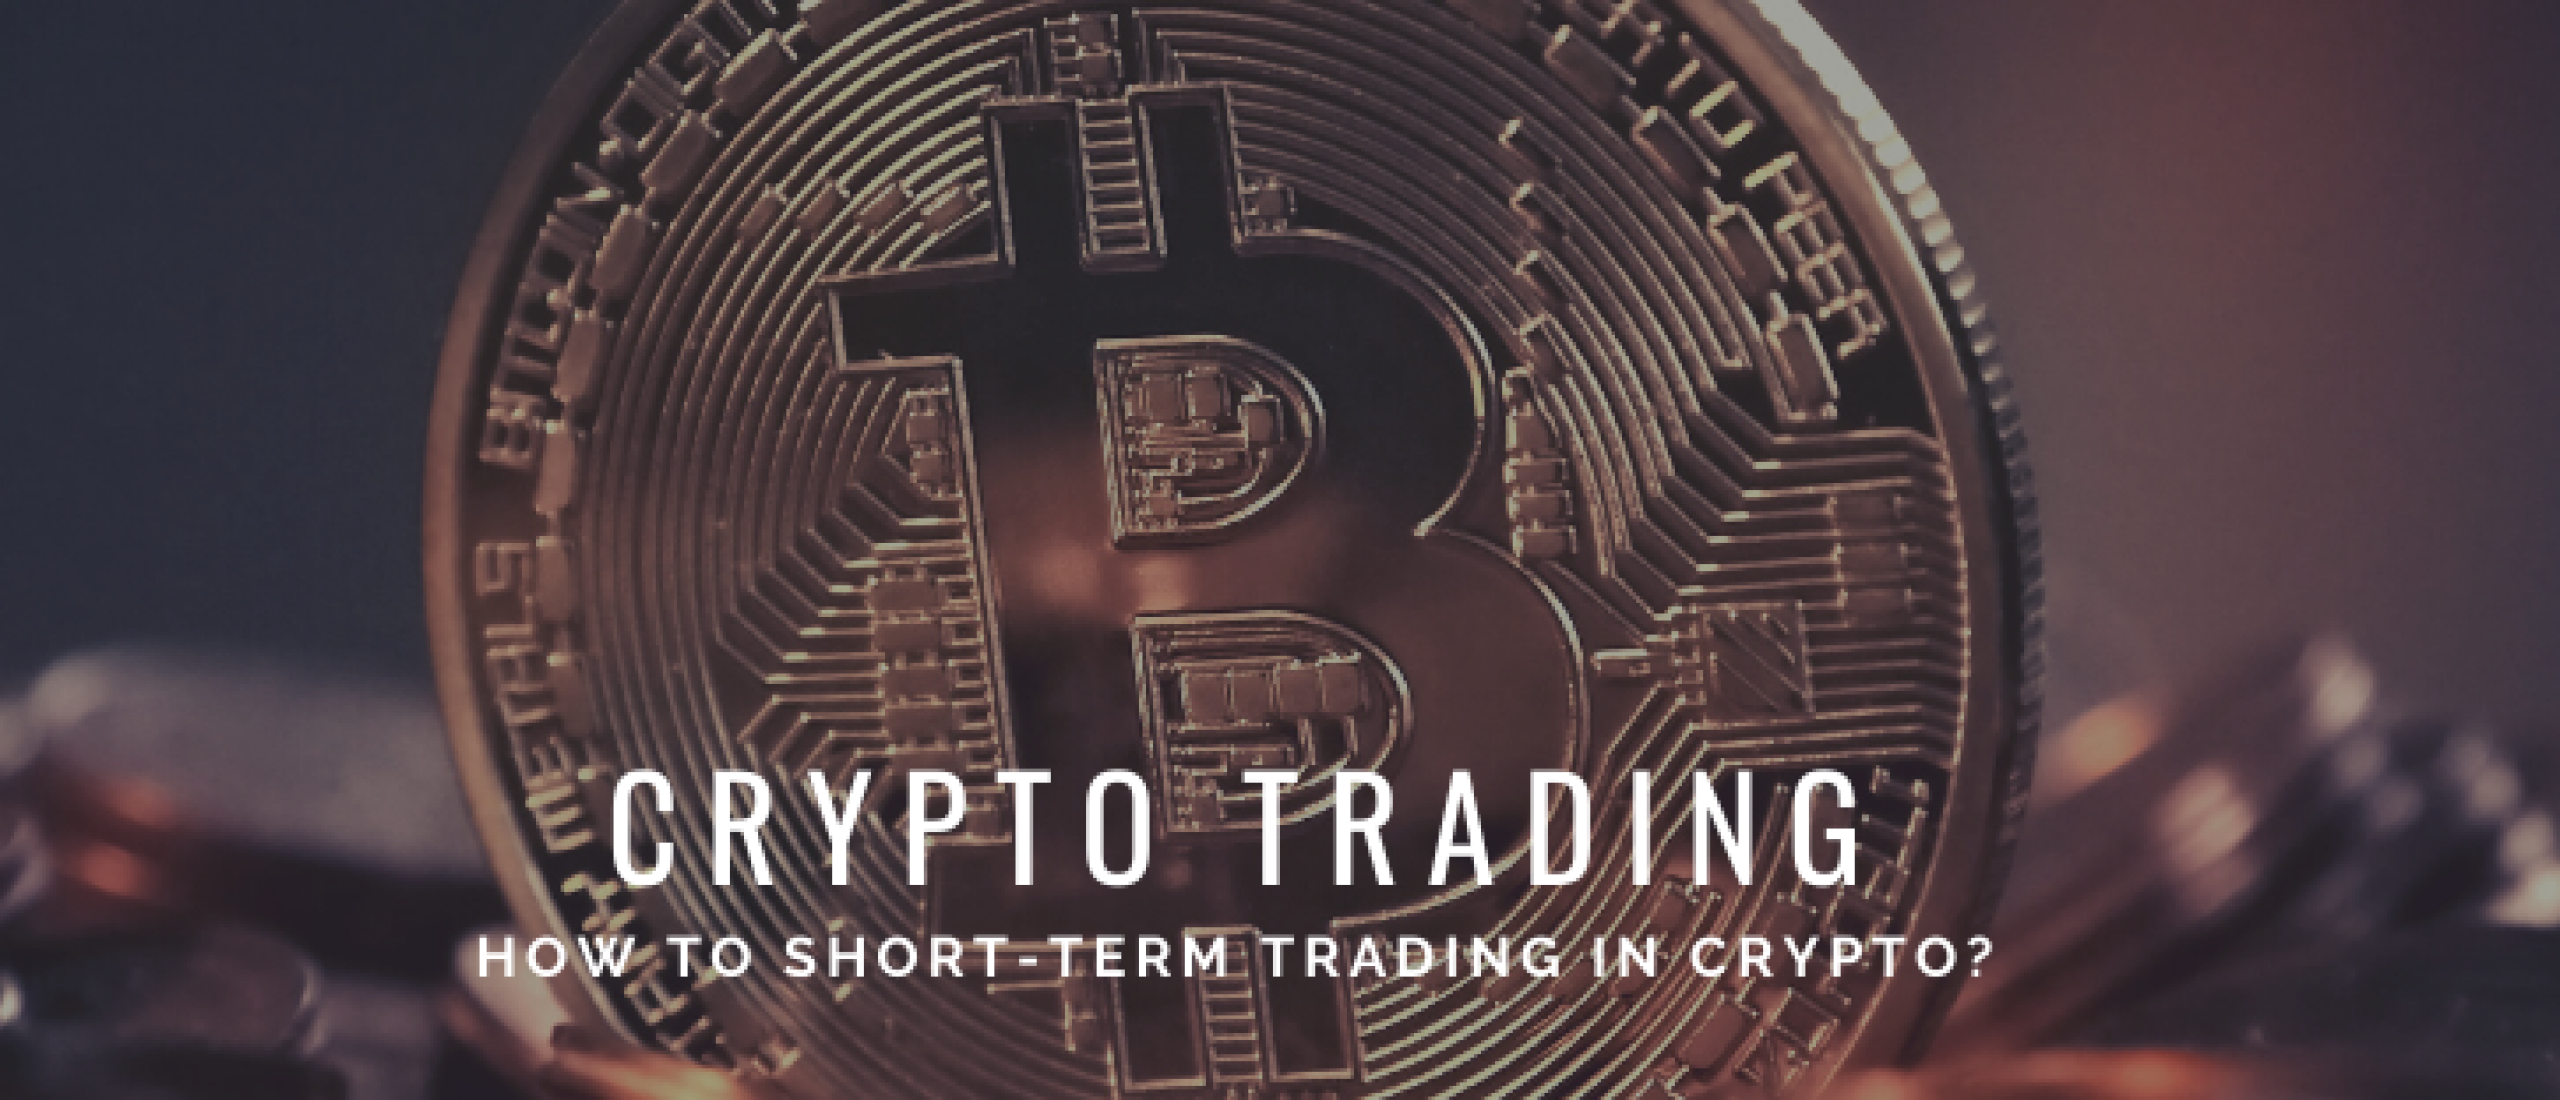 How to Short-Term Trading in Crypto? 3 Techniques & Tools